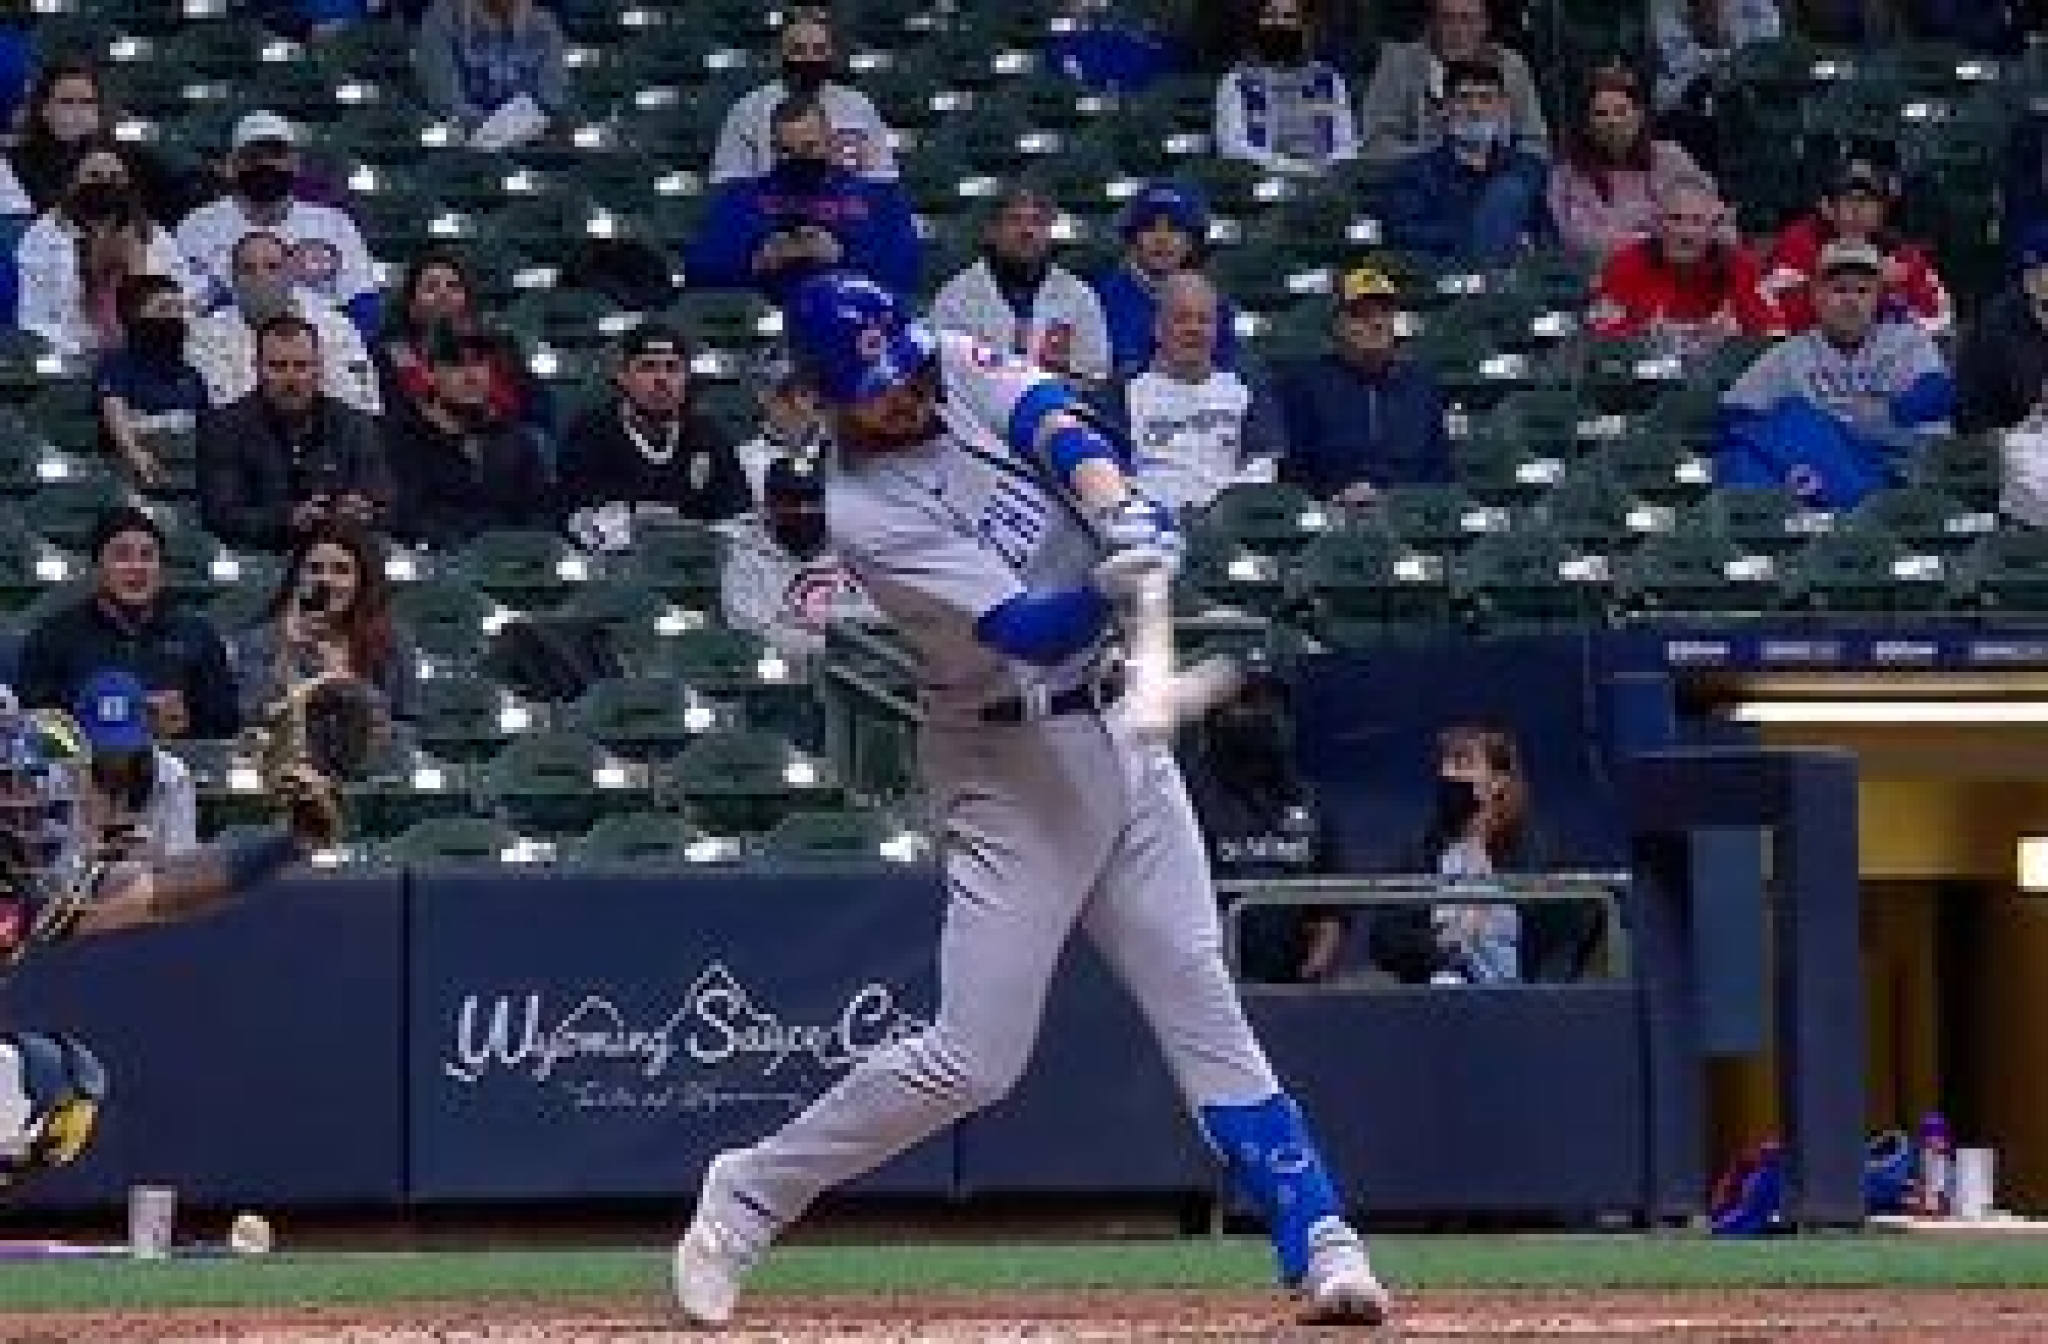 Kris Bryant cranks solo homer to give Cubs a 1-0 lead over Brewers